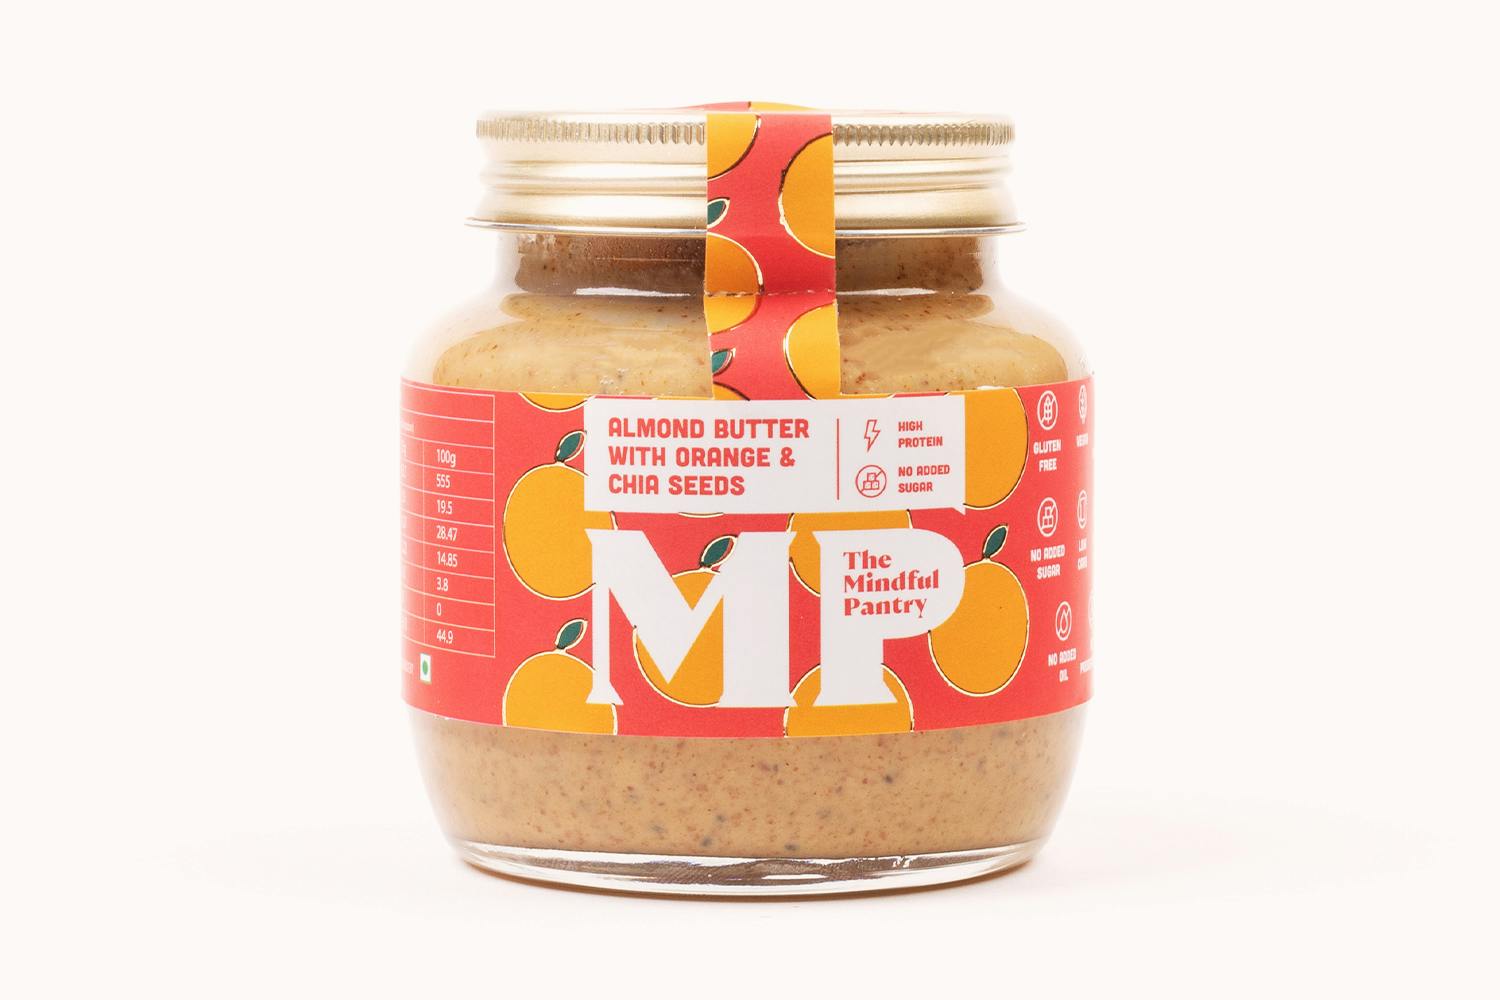 The Mindful Pantry Almond Butter with Orange and Chia Seeds